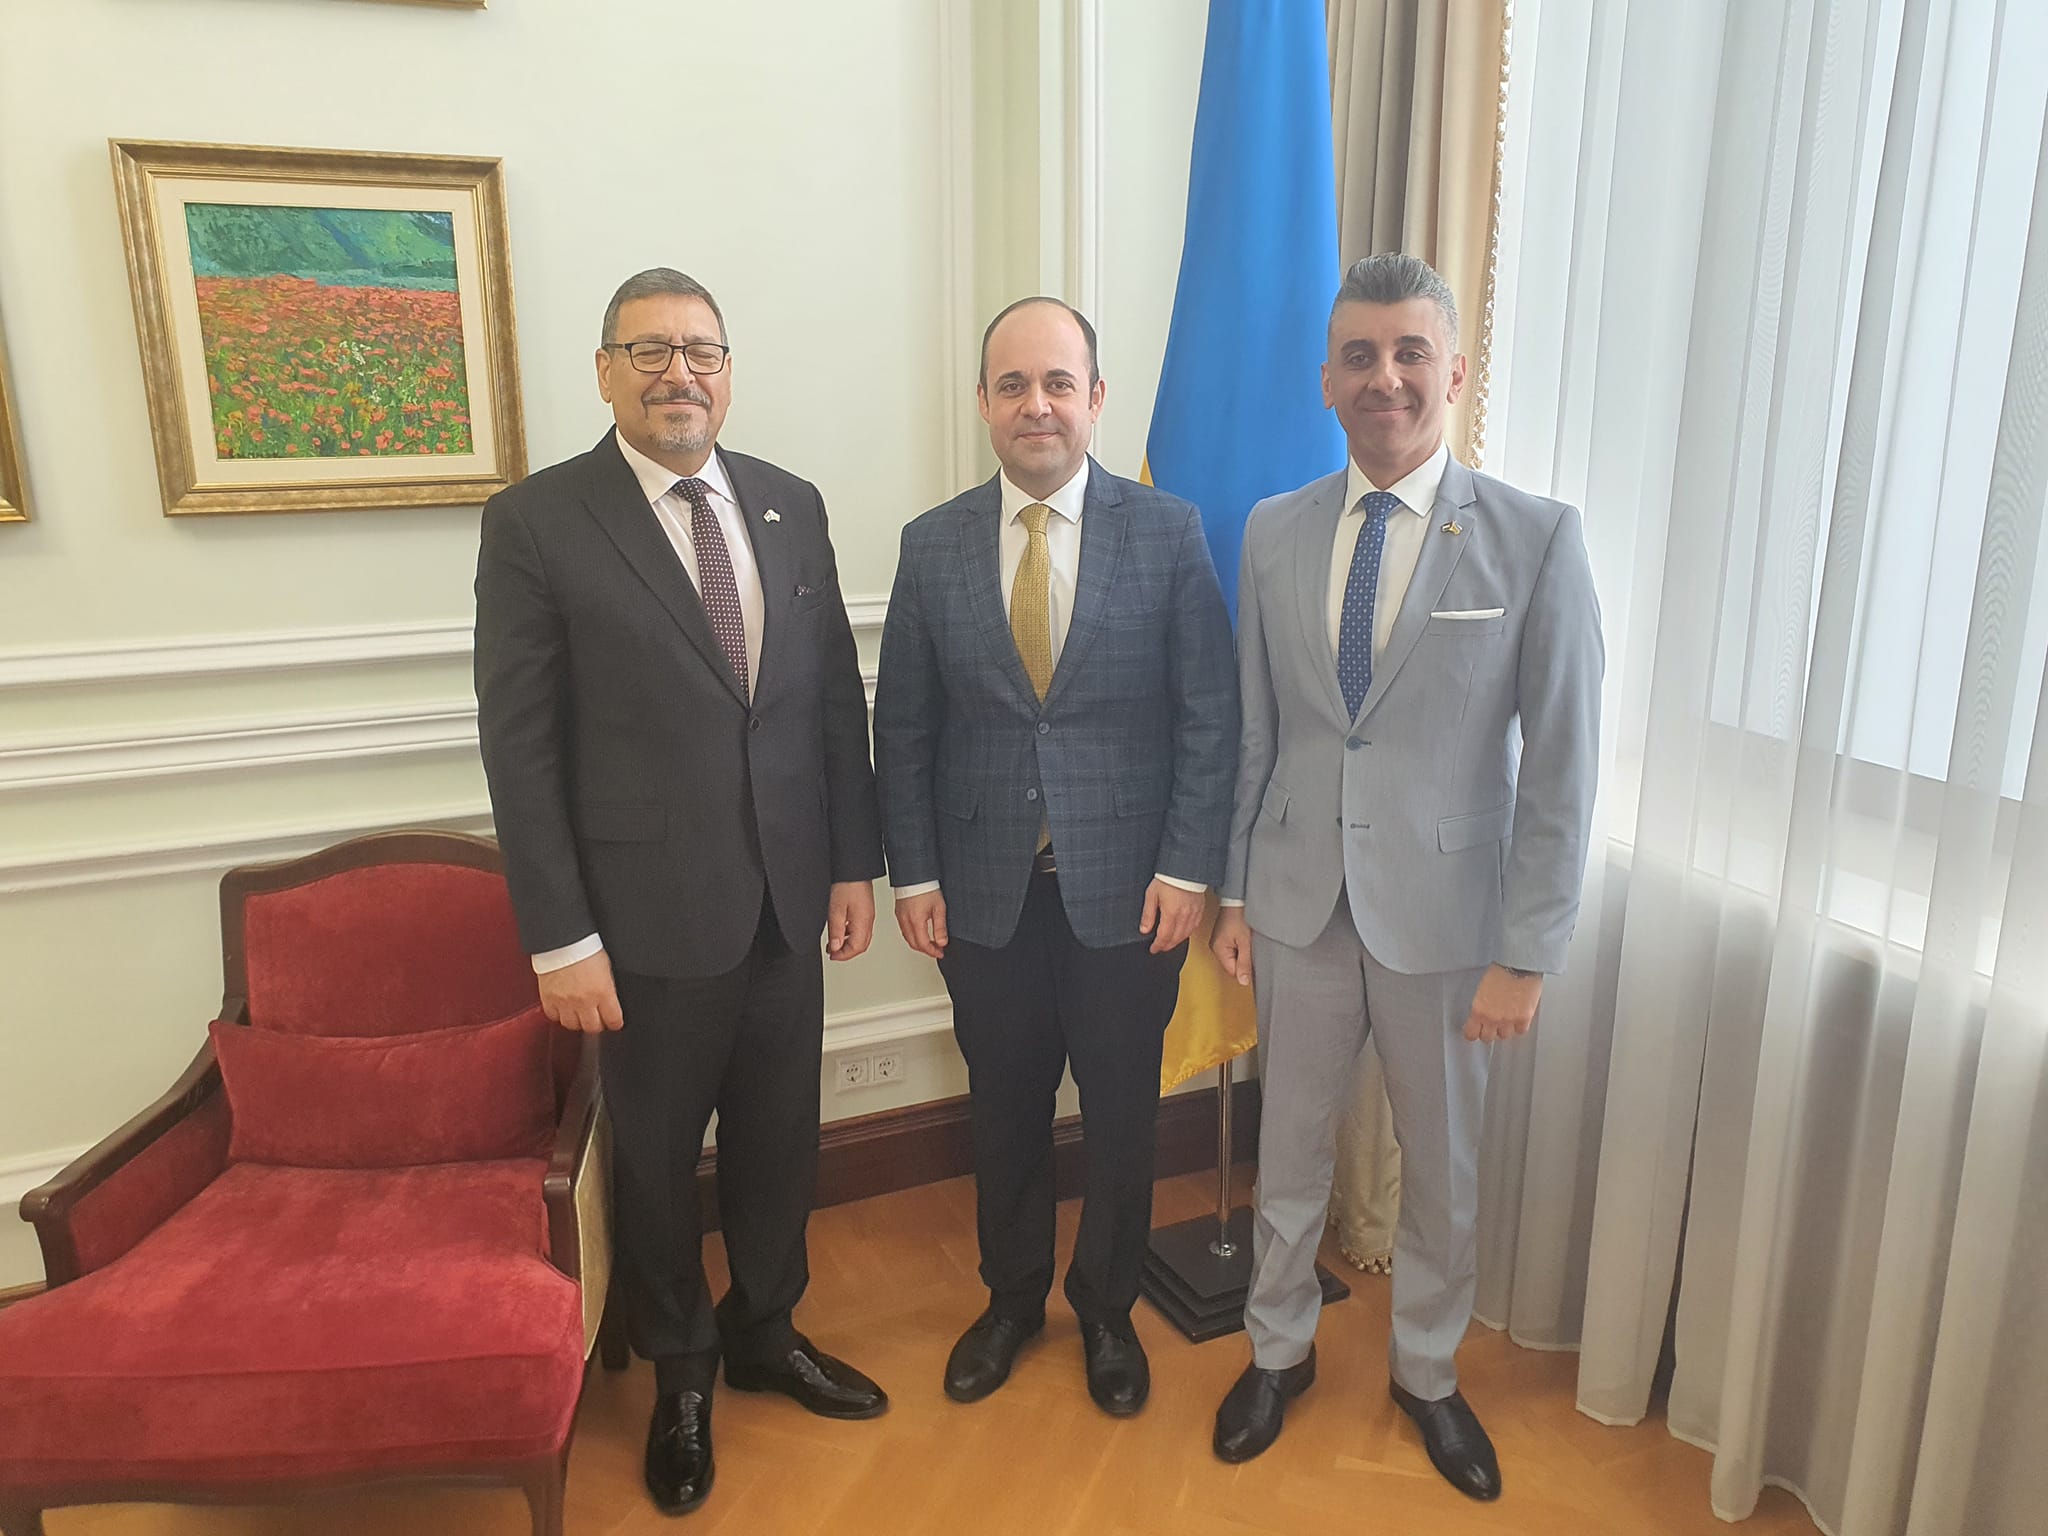 Ambassador of the State of Palestine to Ukraine Mr. Hashem Dajani met with H.E. Ambassador Maksym Subkh, Special Representative of Ukraine for the Middle East and Africa